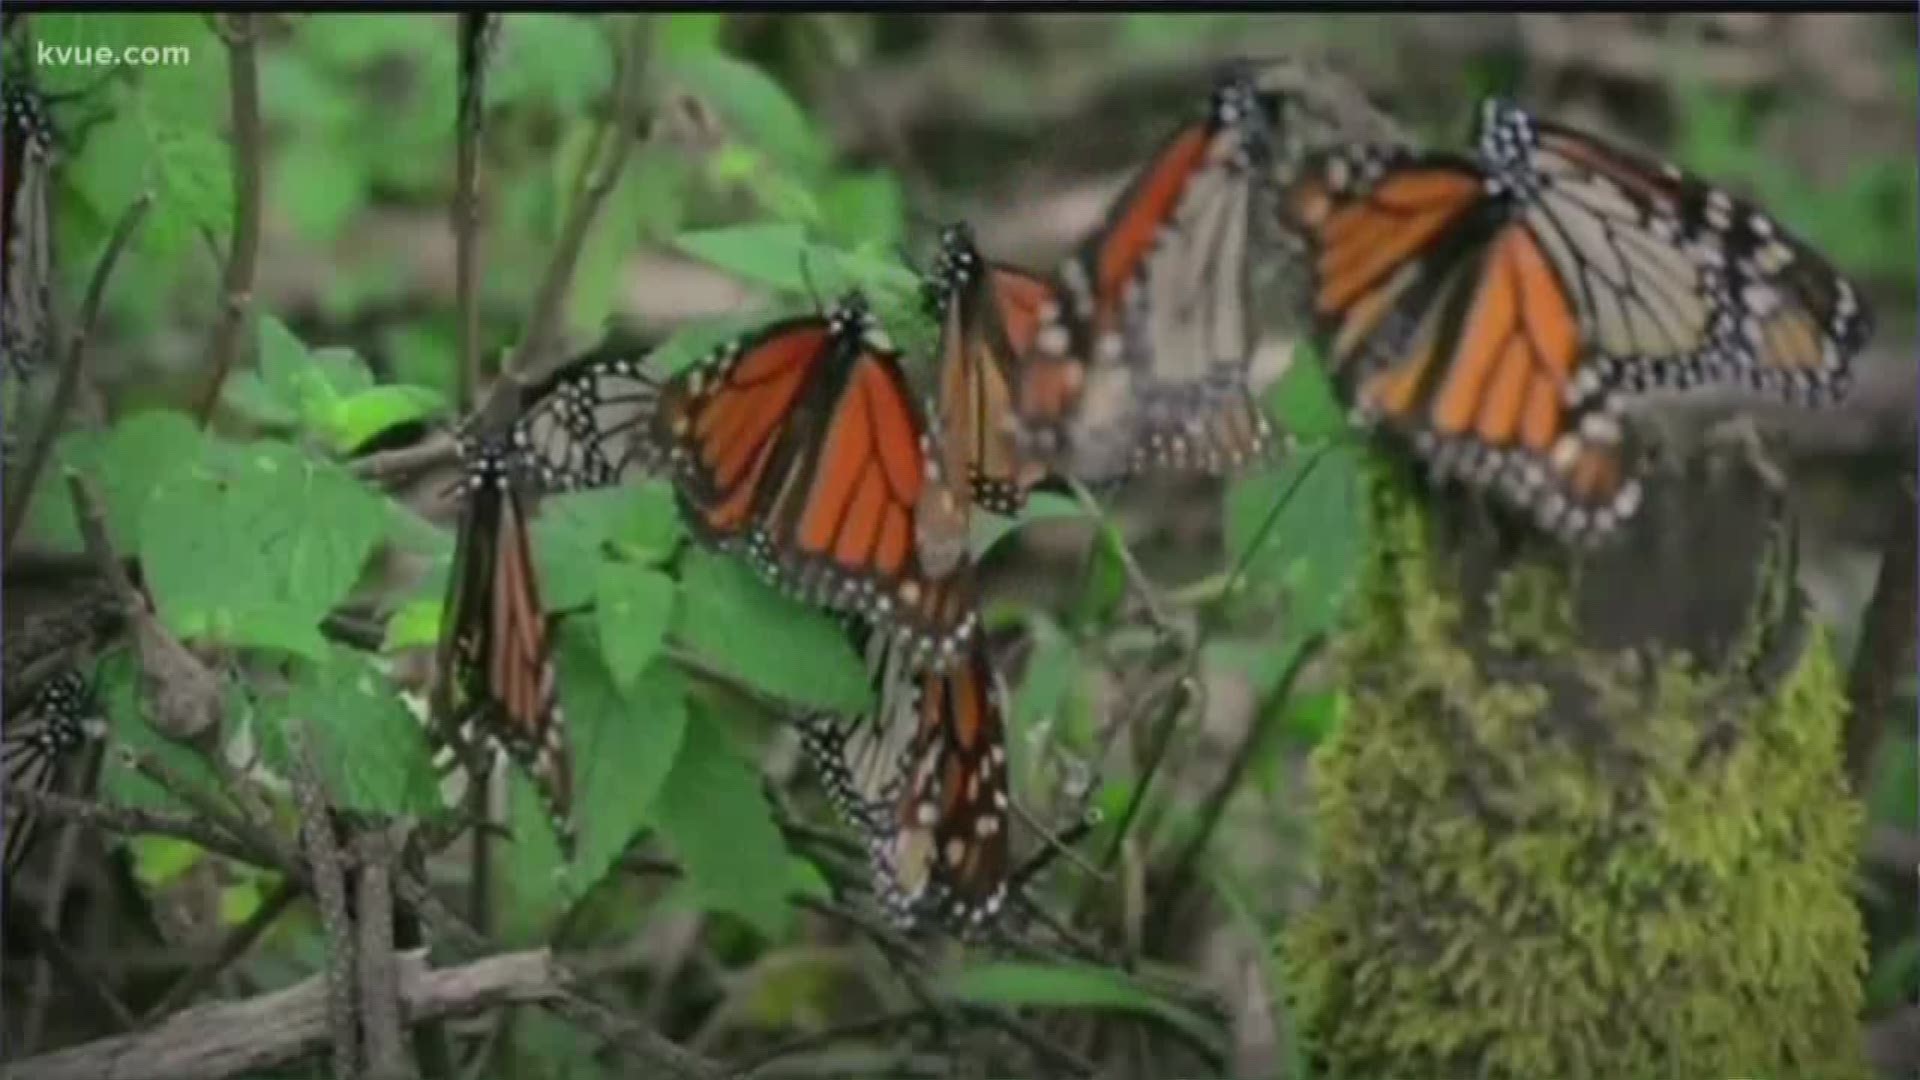 This is the time of year when millions of monarch butterflies migrate through Central Texas.